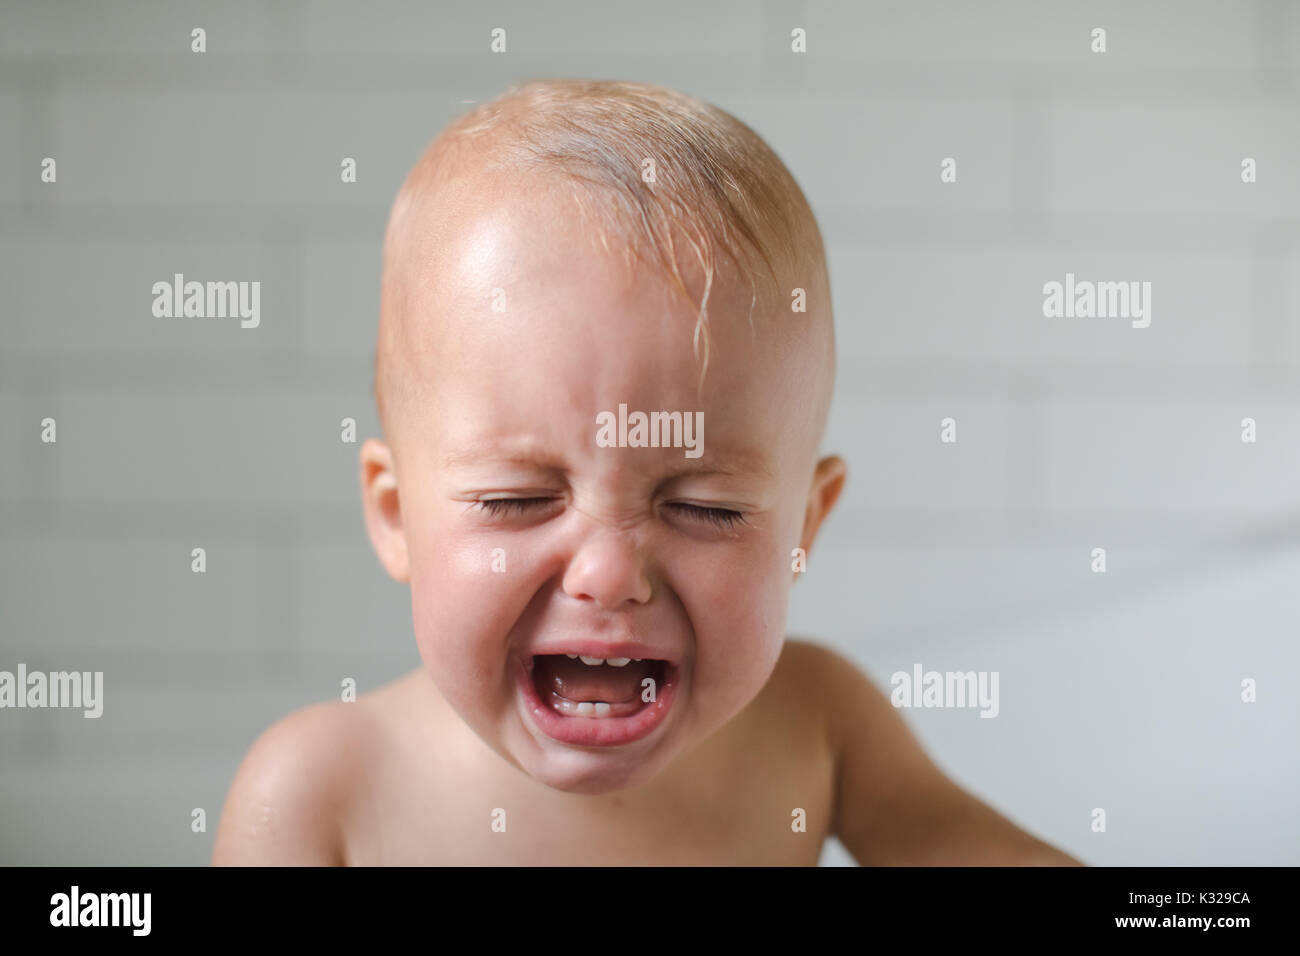 Photo of one-year-old baby cries close-up Stock Photo